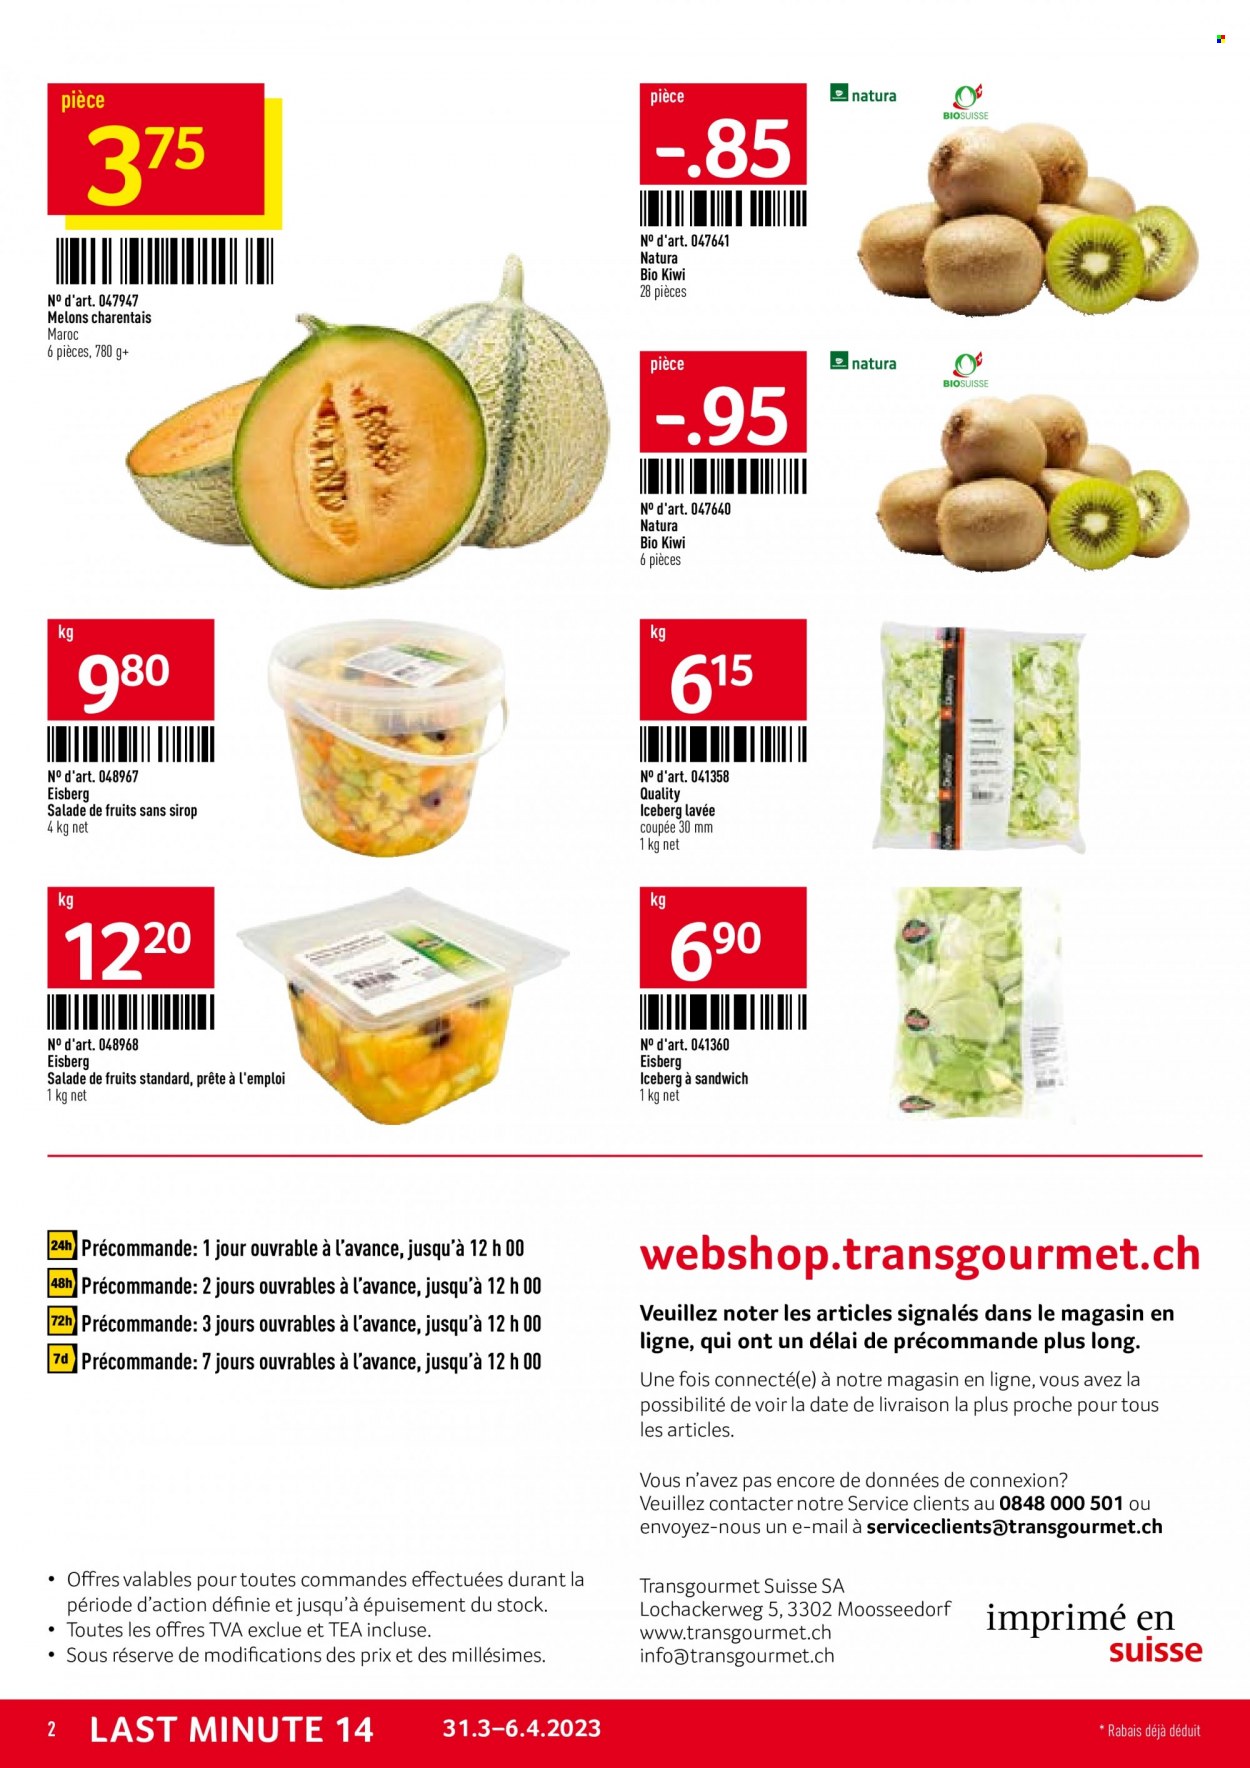 Catalogue TransGourmet - 31.3.2023 - 6.4.2023. Page 2.